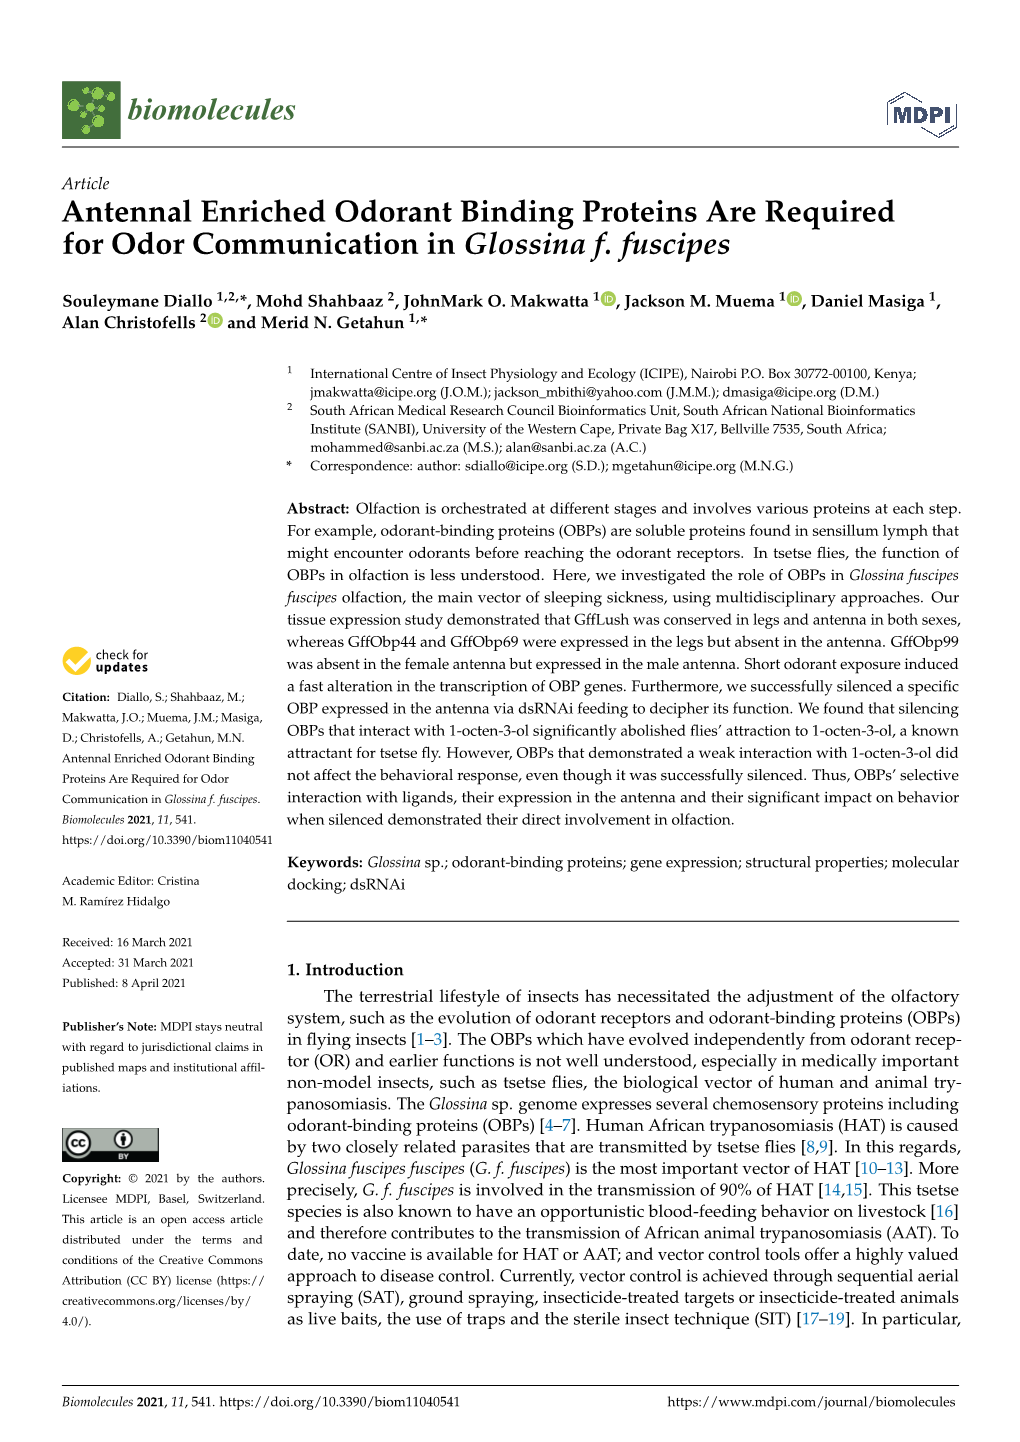 Antennal Enriched Odorant Binding Proteins Are Required for Odor Communication in Glossina F